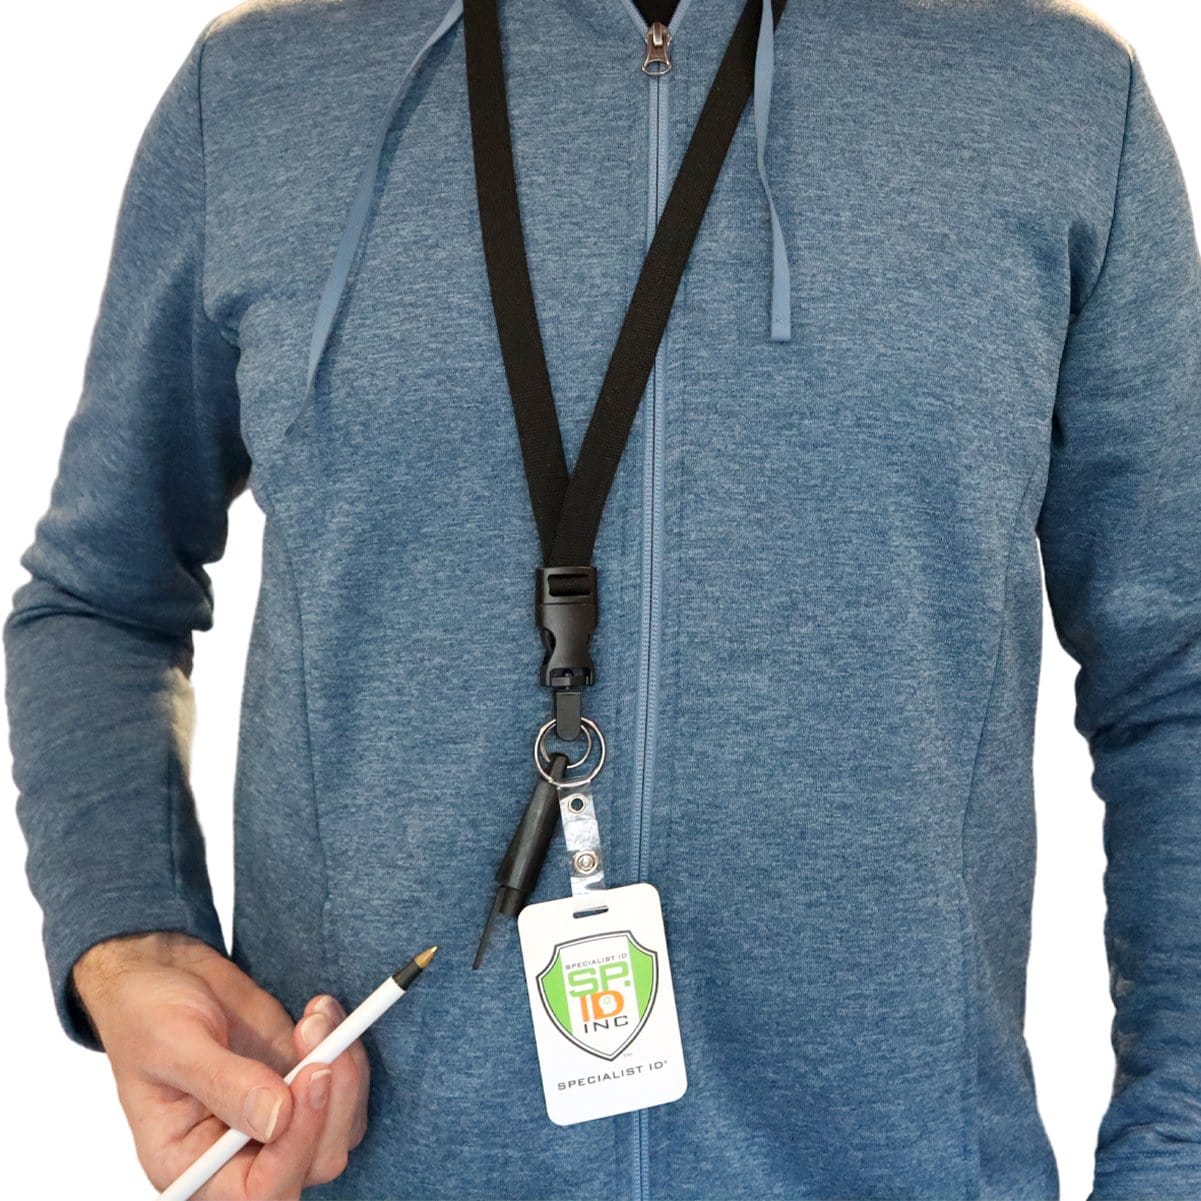 Lanyard with Pen and ID Badge Holder - All in One Neck Lanyards